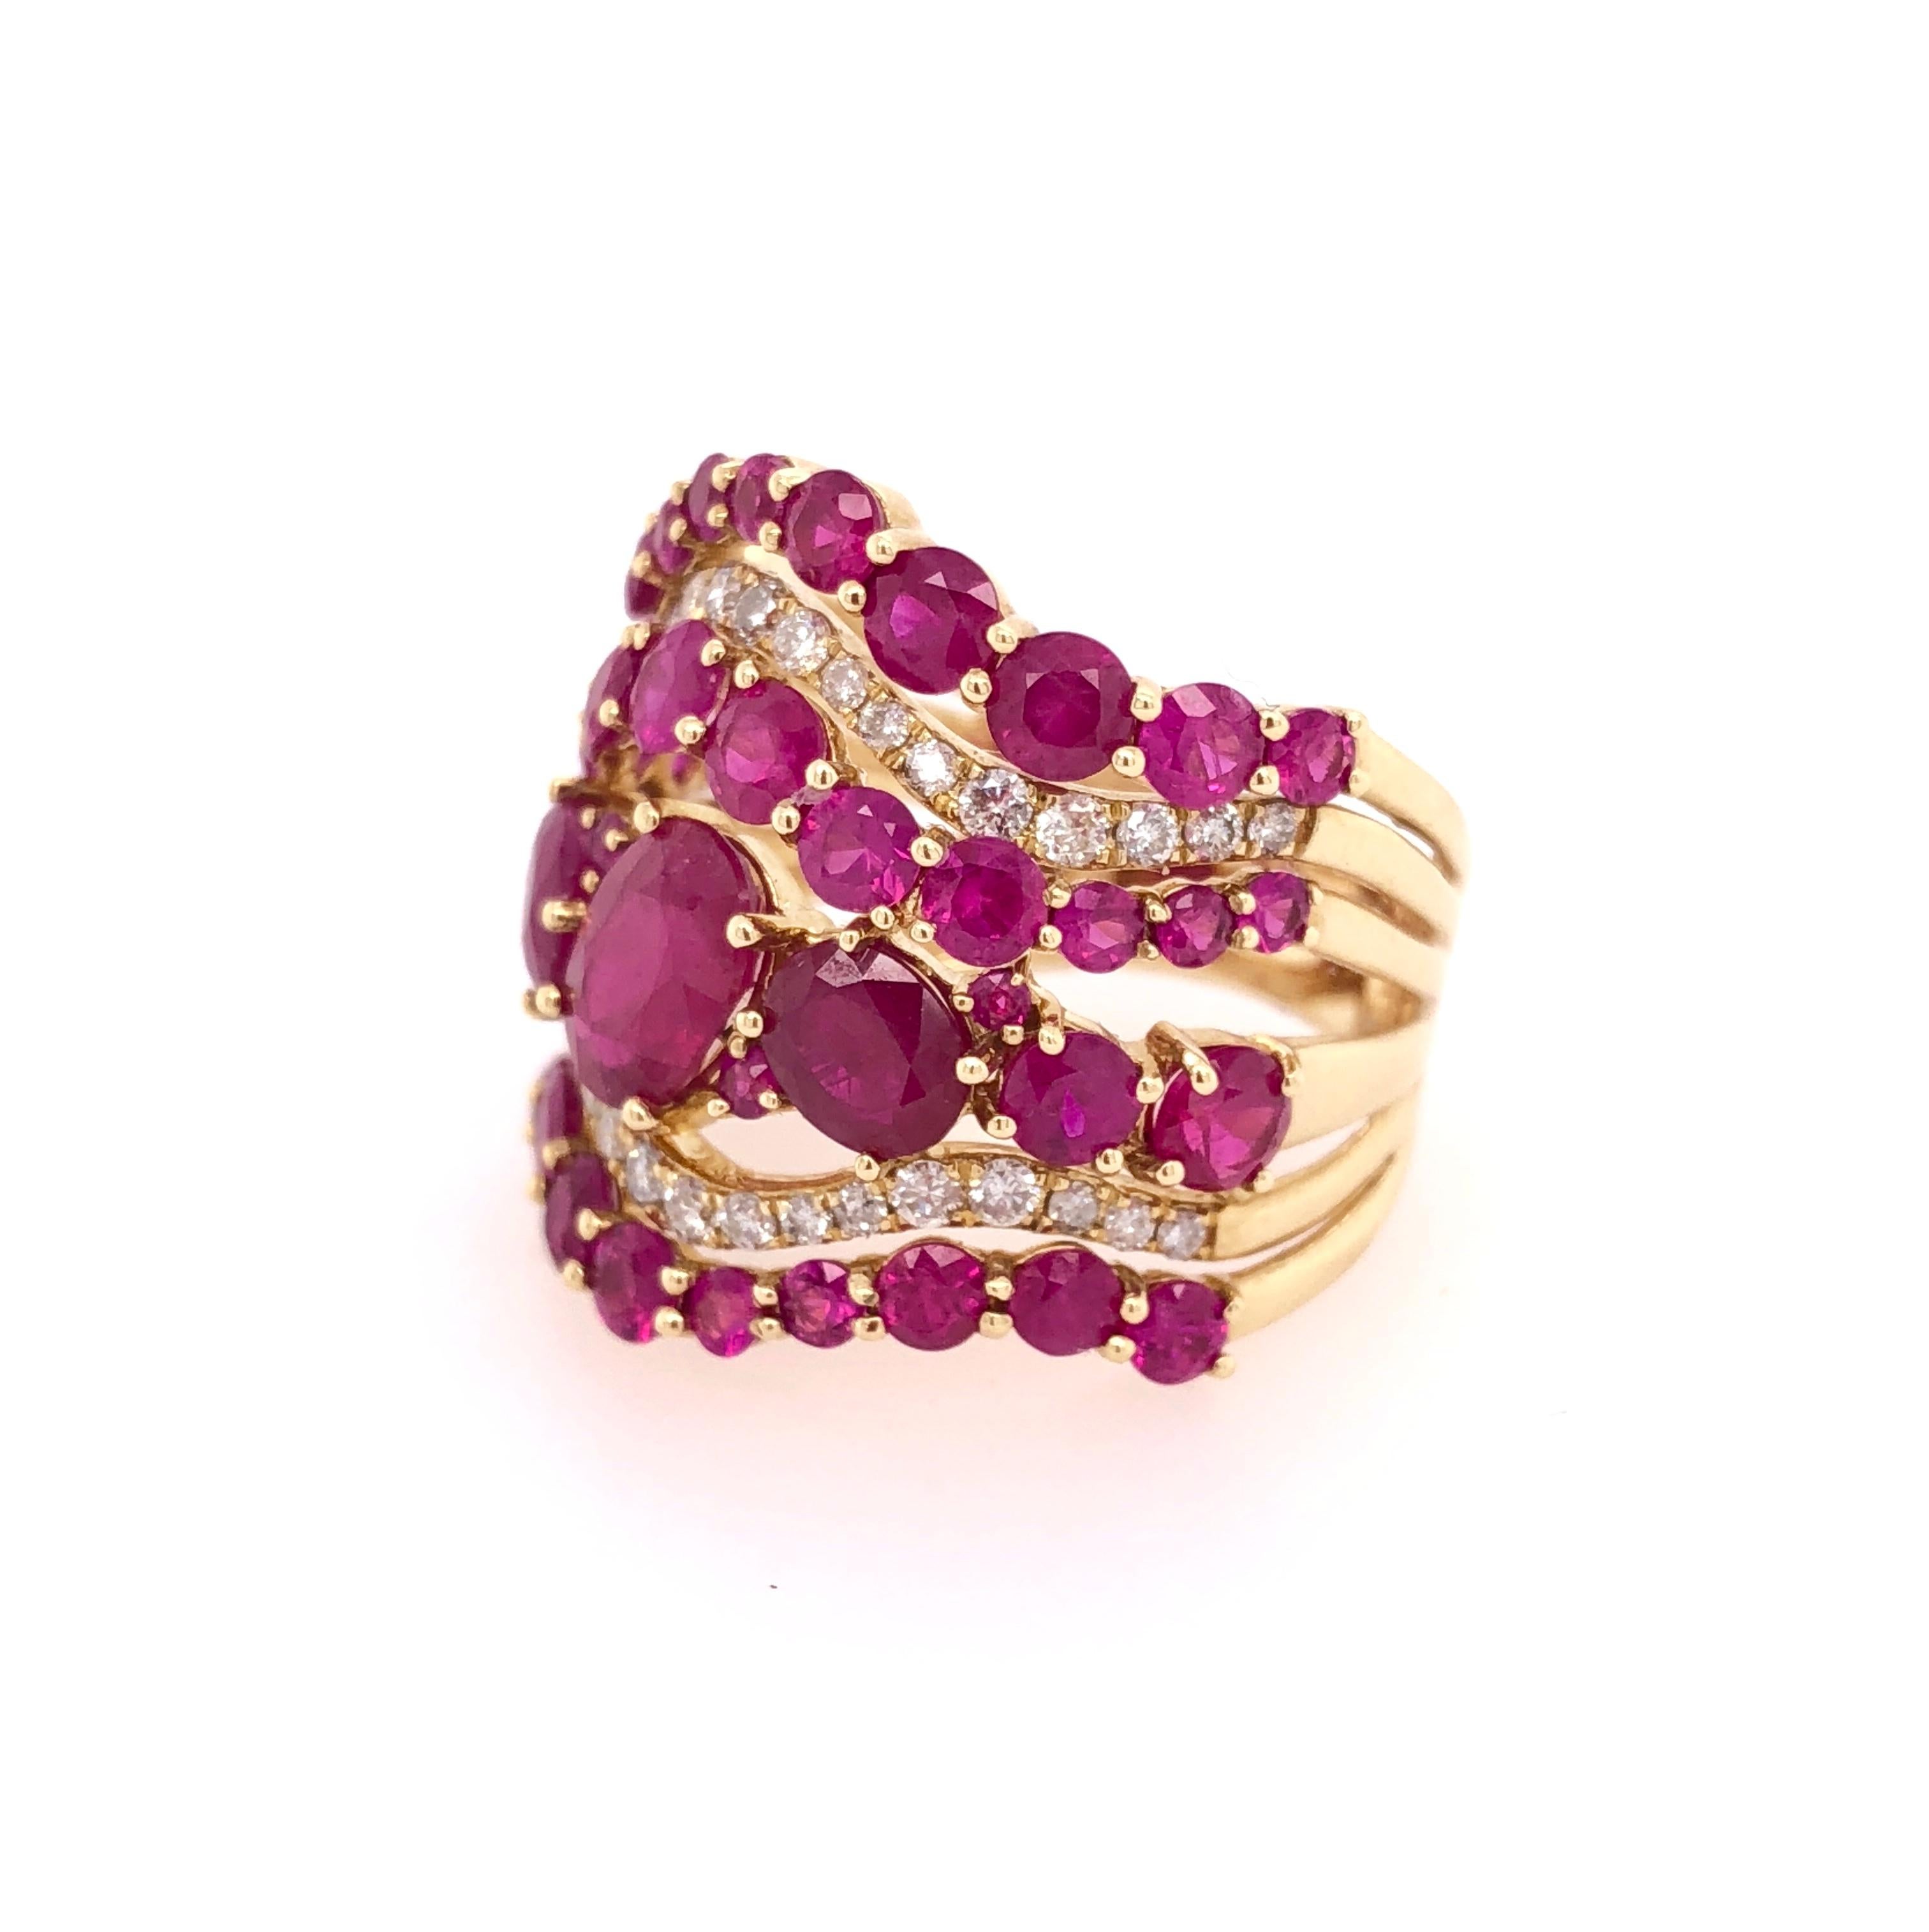 18K Yellow Gold
Ruby: 4.40ct total weight.
Treated Ruby: 1.03ct total weight.
Diamonds: 0.39ct total weight.
All diamonds are G-H/SI stones.

Height - is approximately 2cm/0.79inches.